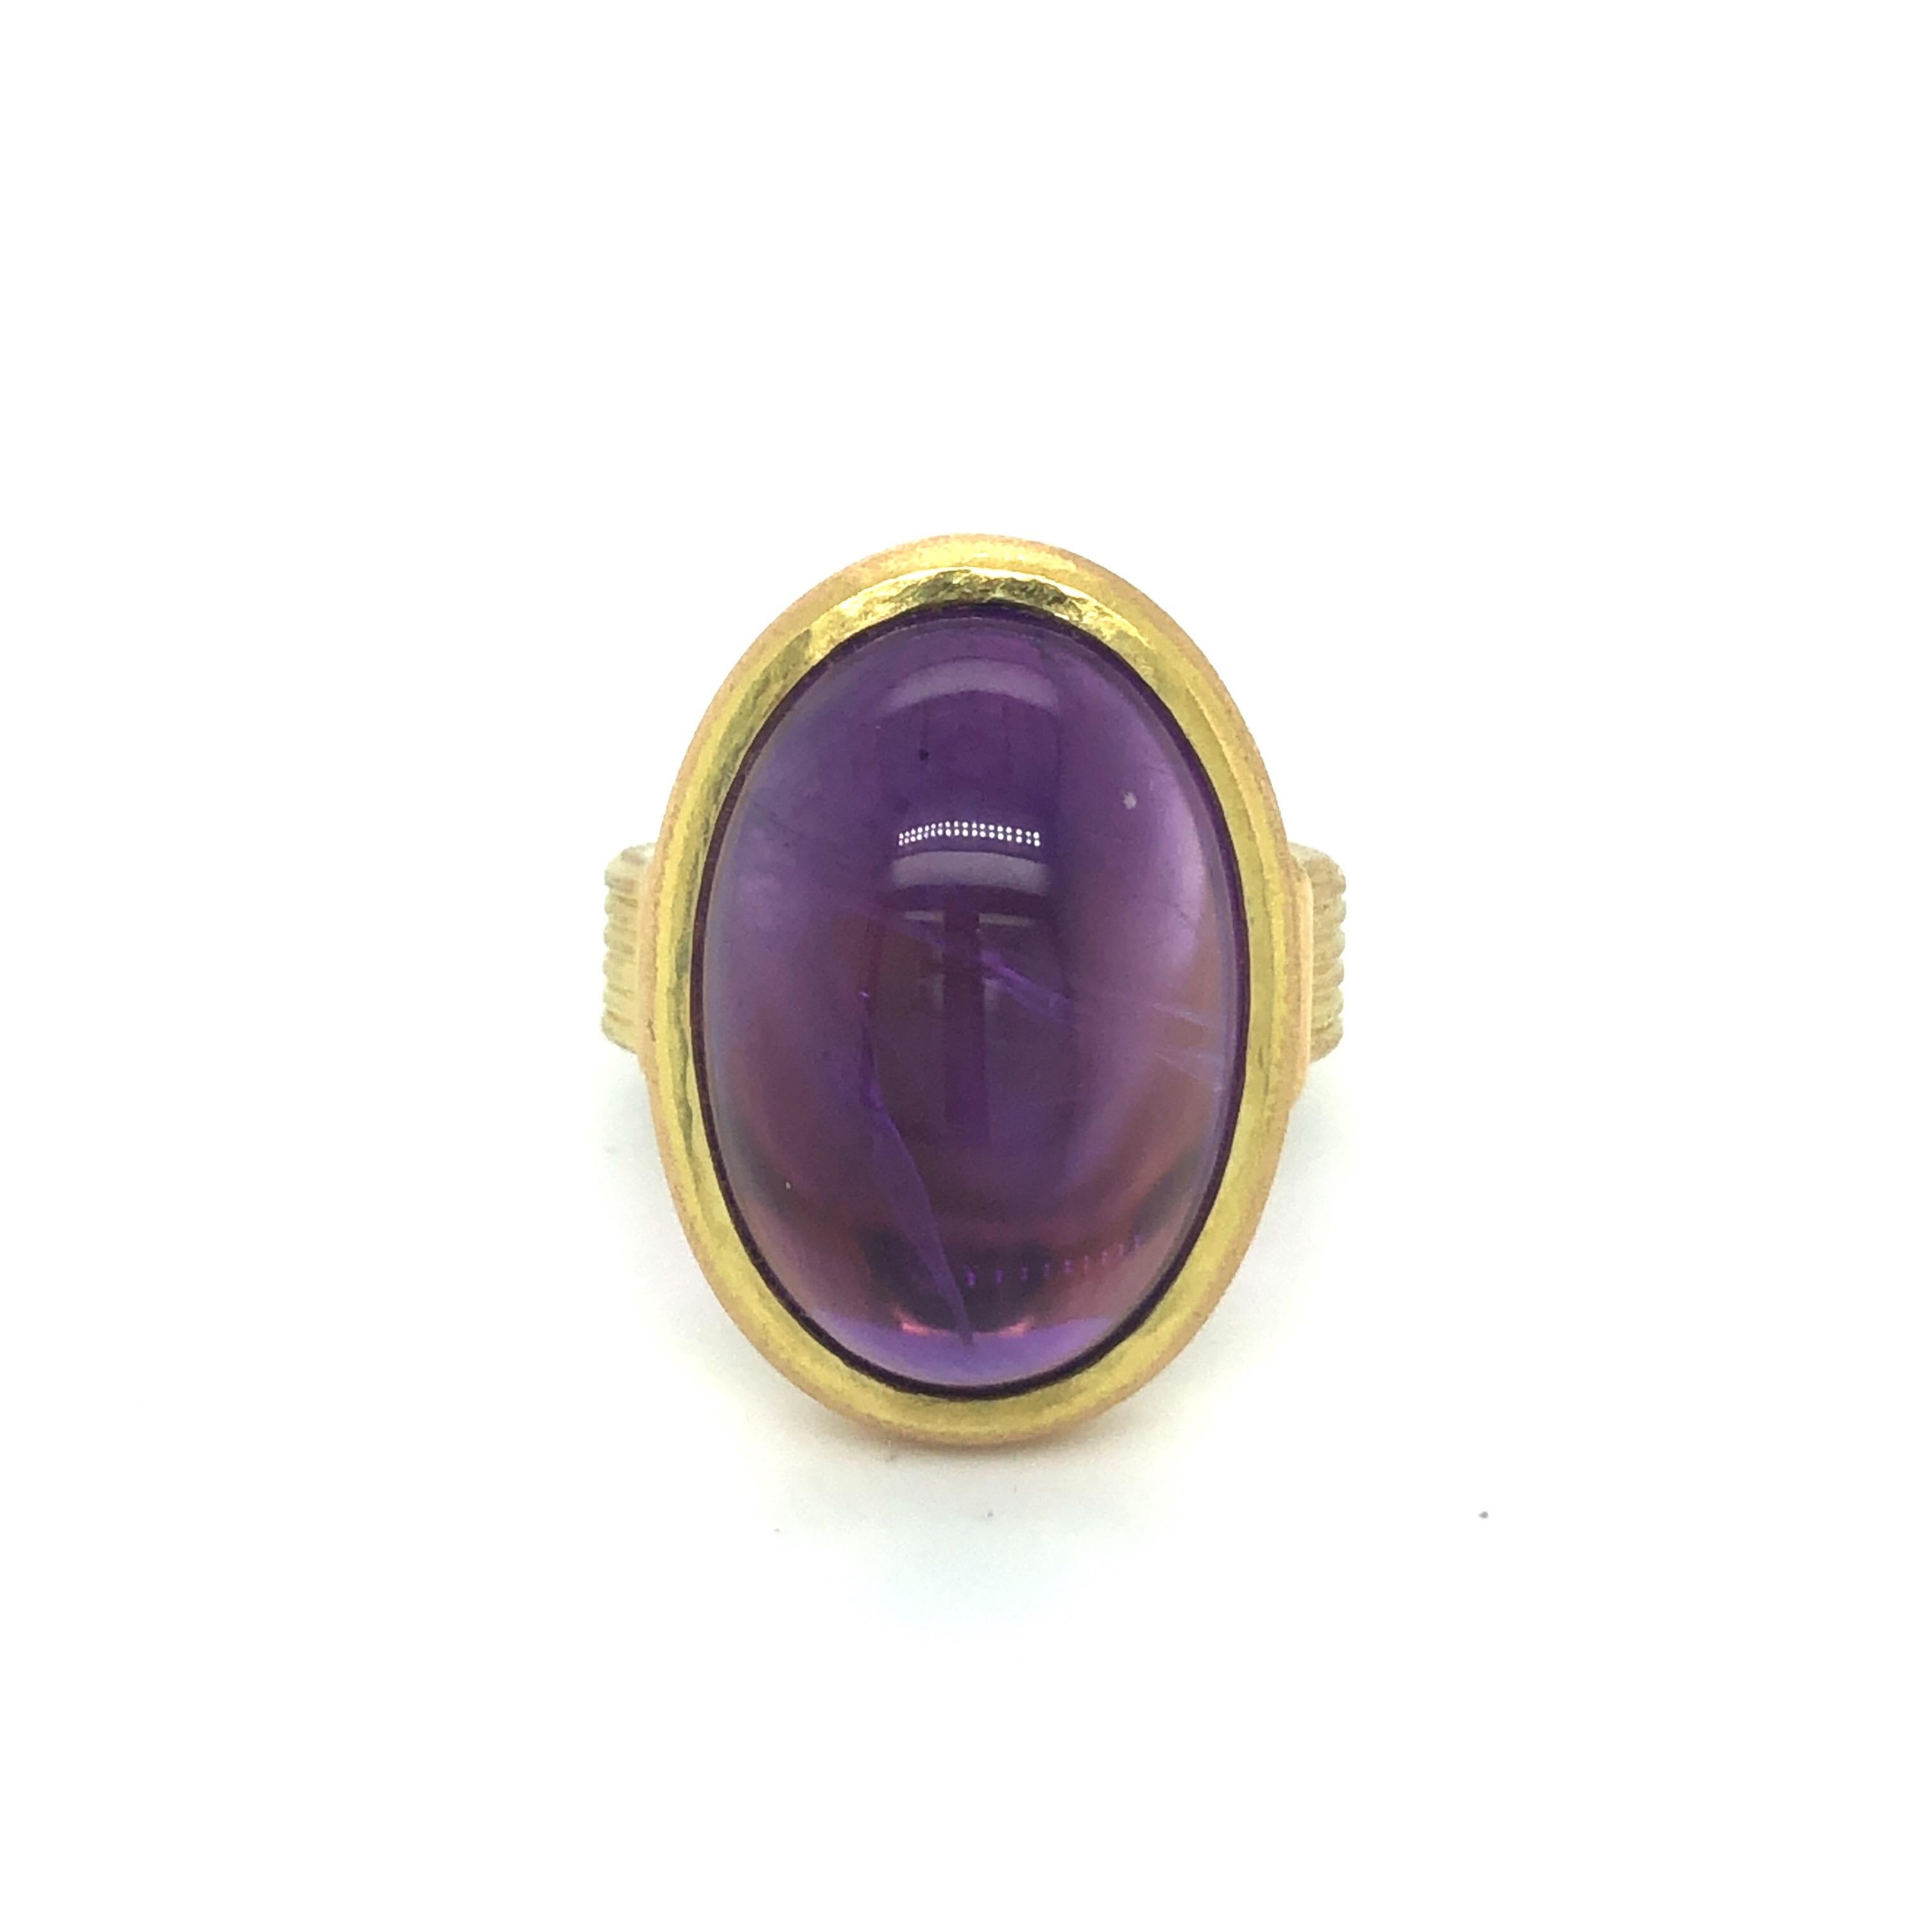 Beautiful 18 karat yellow gold and amethyst cocktail ring.
Crafted in brushed yellow gold and set with an oval amethyst cabochon of circa 18.2 carats, this ring is distinguished by clear lines, perfect proportions and simplicity. The grooved ring